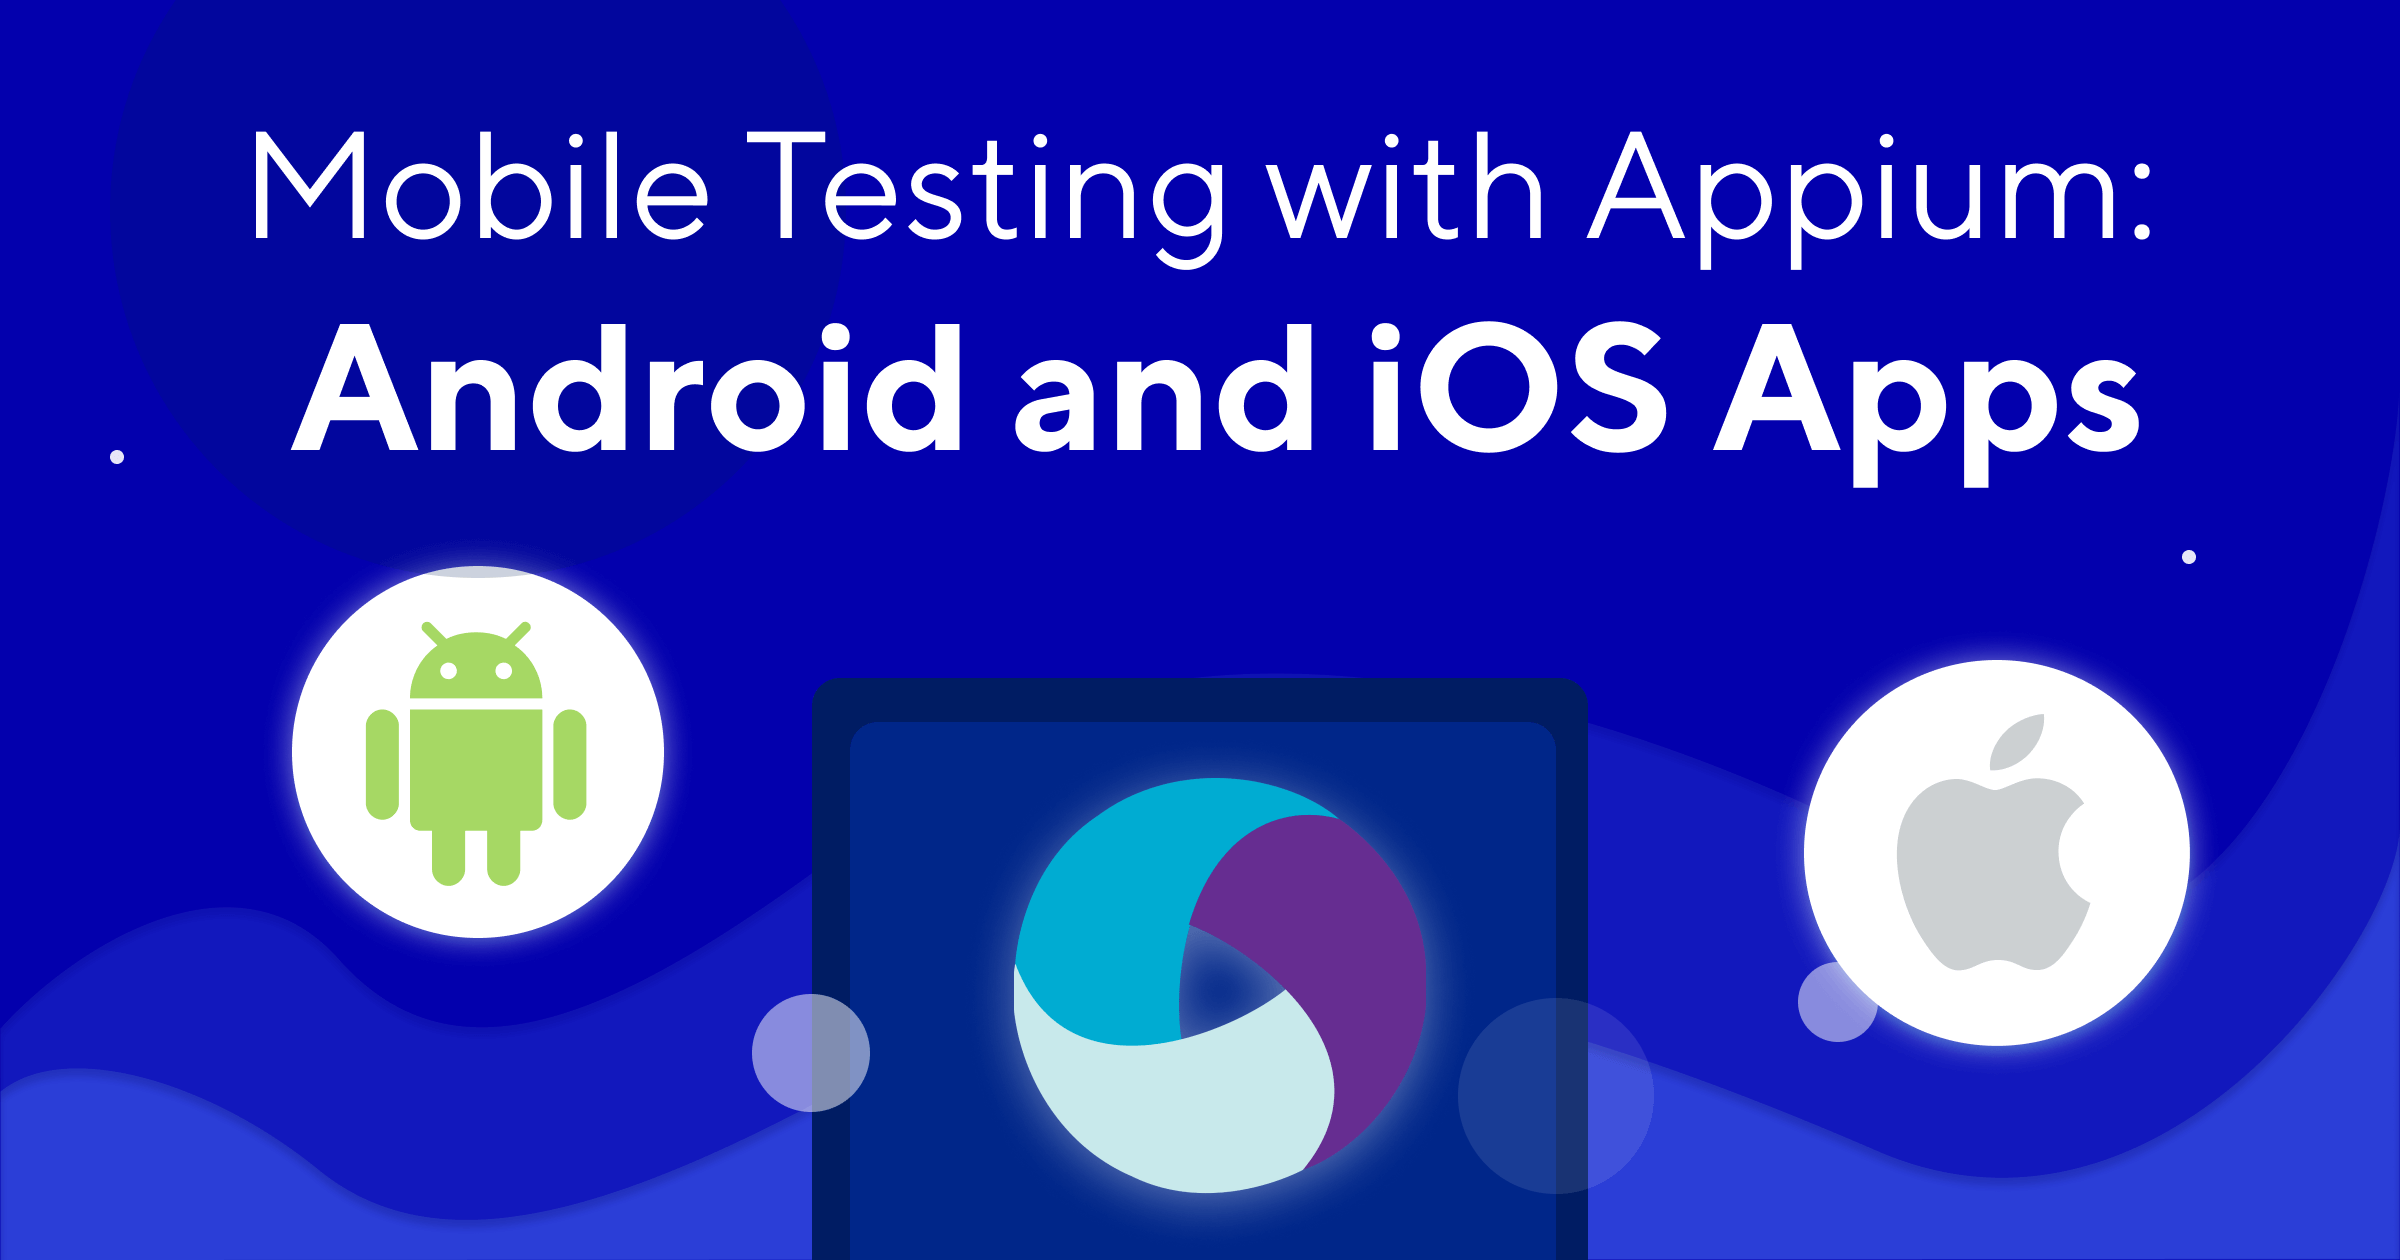 Why Appium Is the Best App Testing Tool for iOS and Android